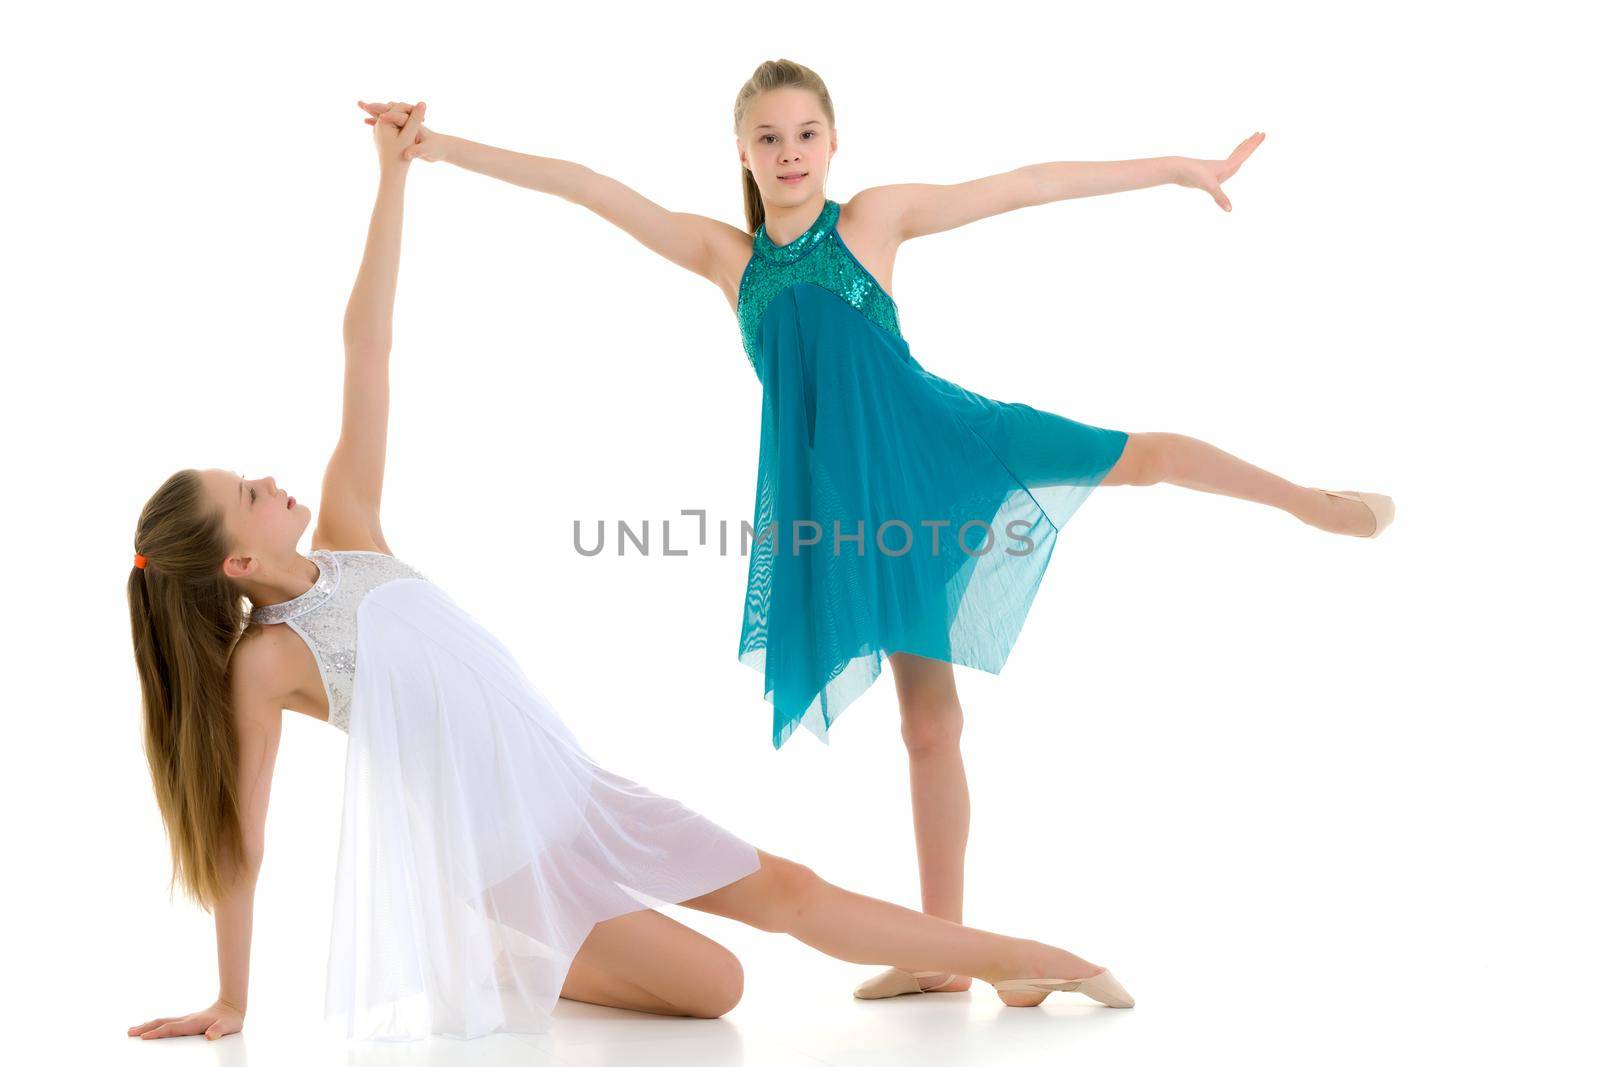 Two Pretty Gymnasts Performing Rhythmic Gymnastics Exercise, Portrait of Beautiful Teen Twin Sisters Wearing Sport Dresses Dancing in Studio Against White Background